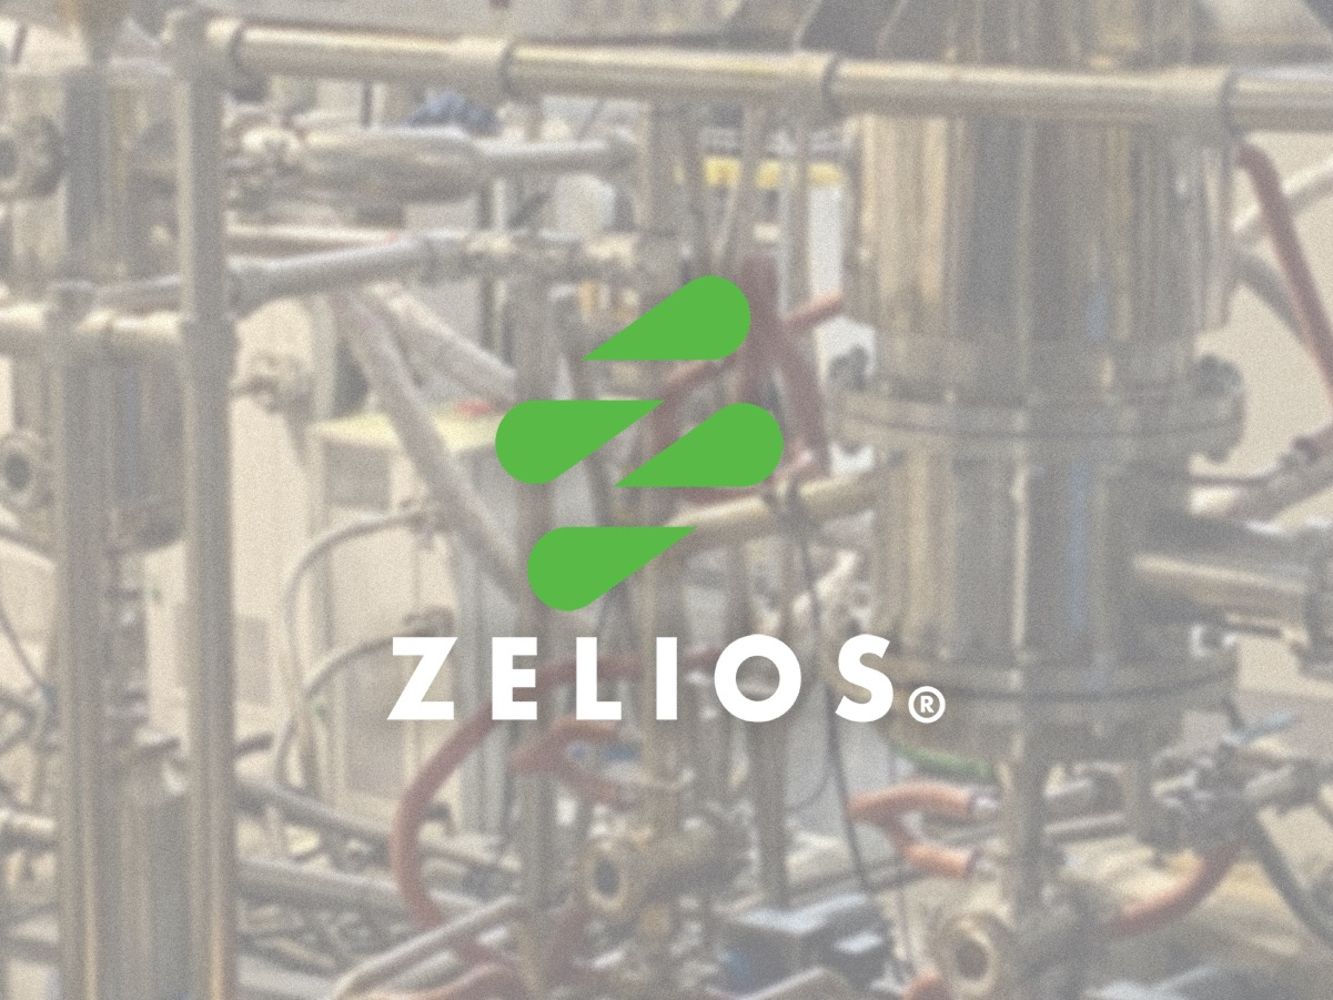 CBD Extraction plants, (2) complete CO2 extraction facilities in KY and CO - Zelios